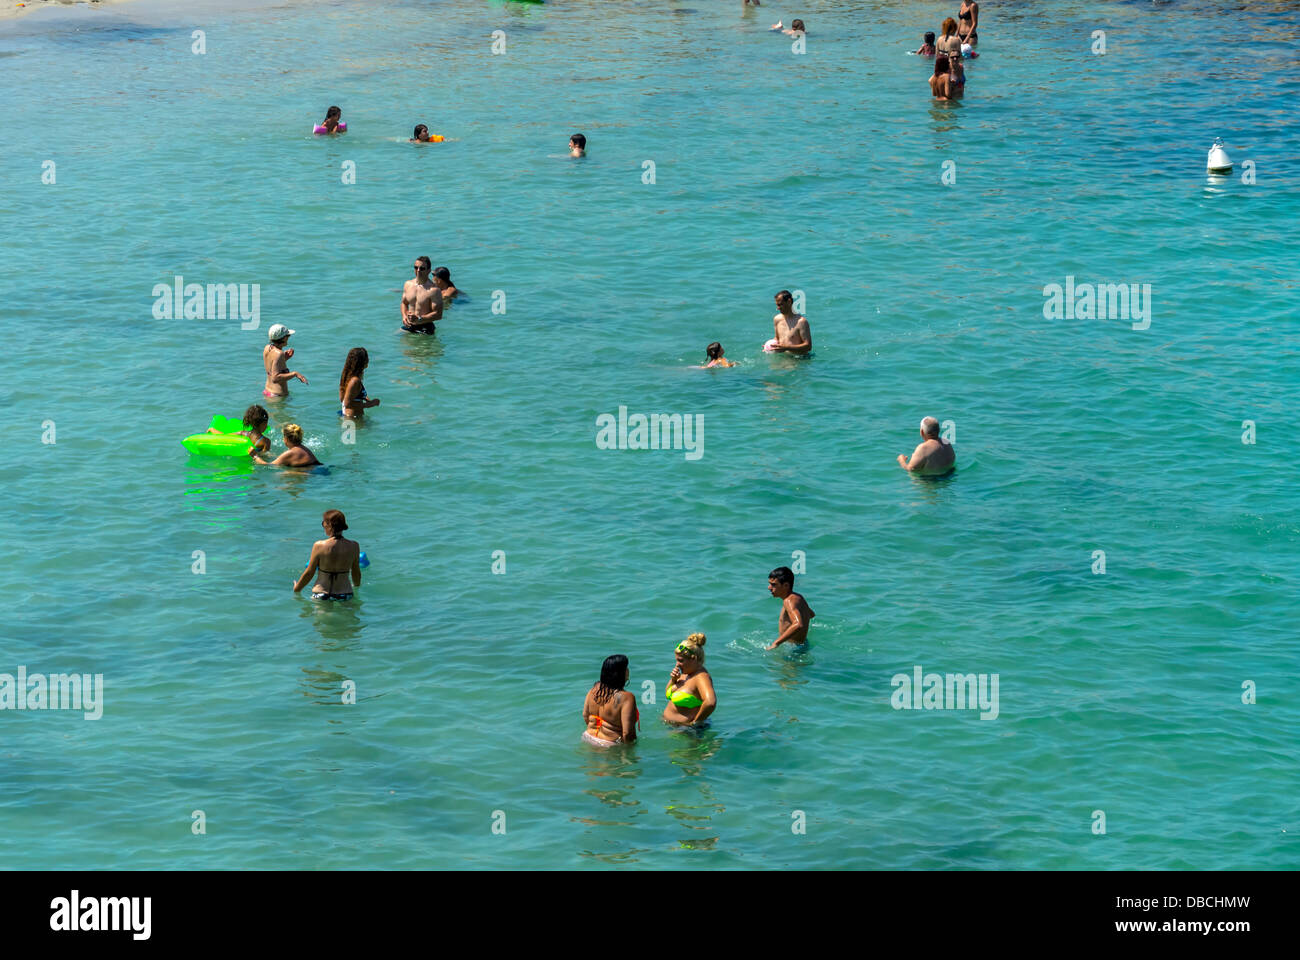 Marseille, France, Aerial View, Beach Scenes, Tourists in Water, Mediterranean Sea, South of France Stock Photo